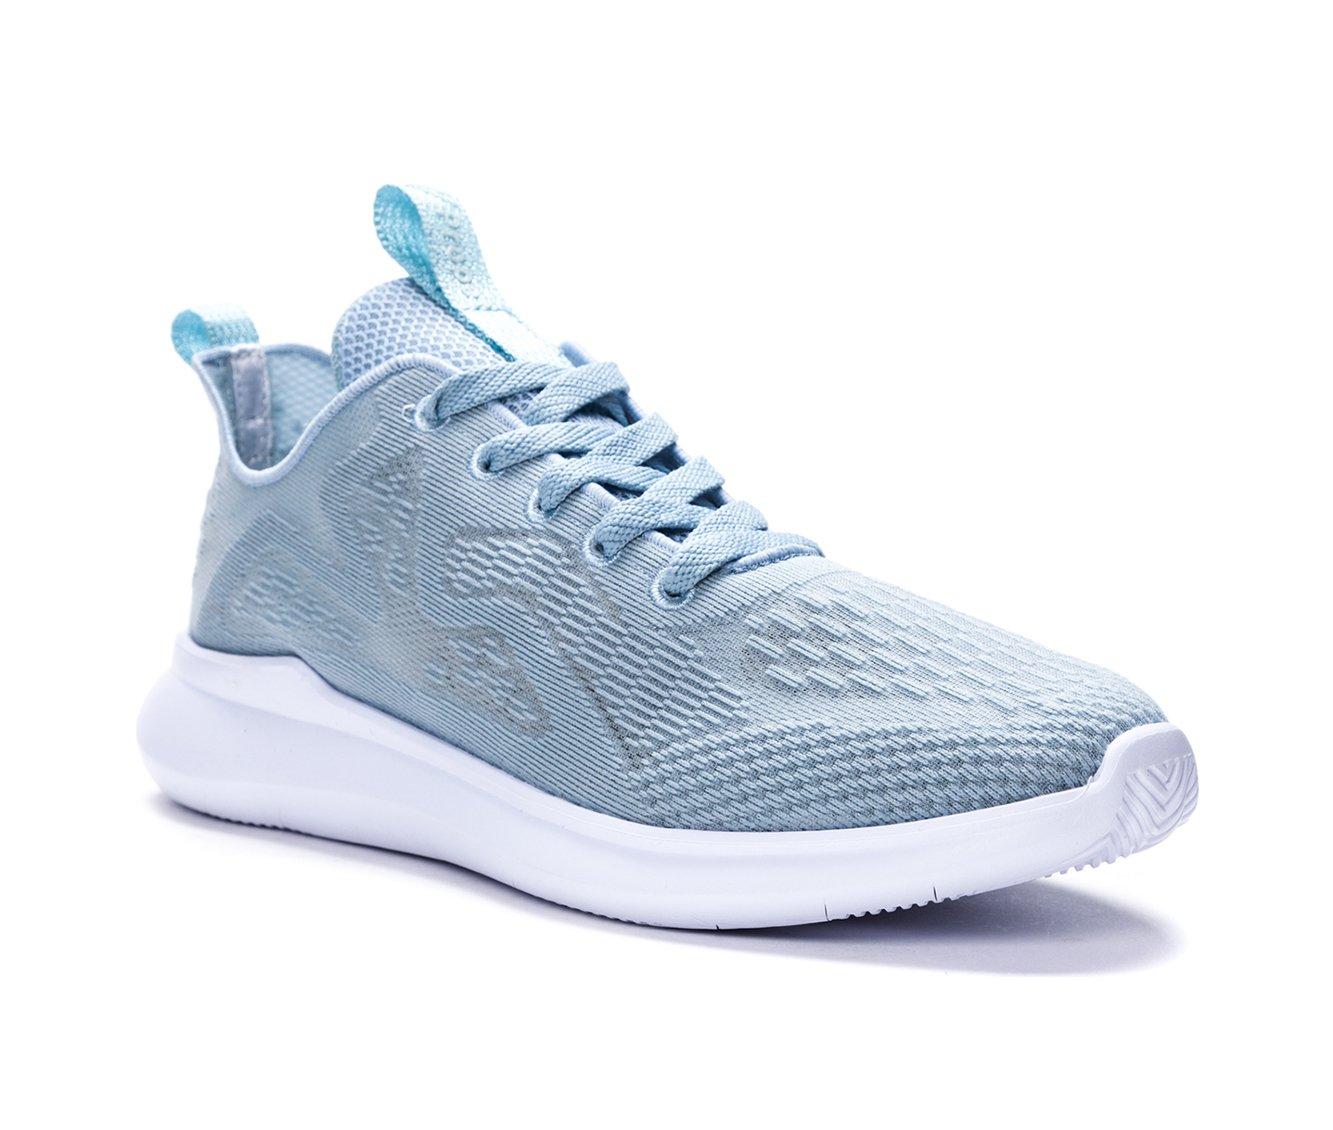 Women's Propet TravelBound Spright Sneakers